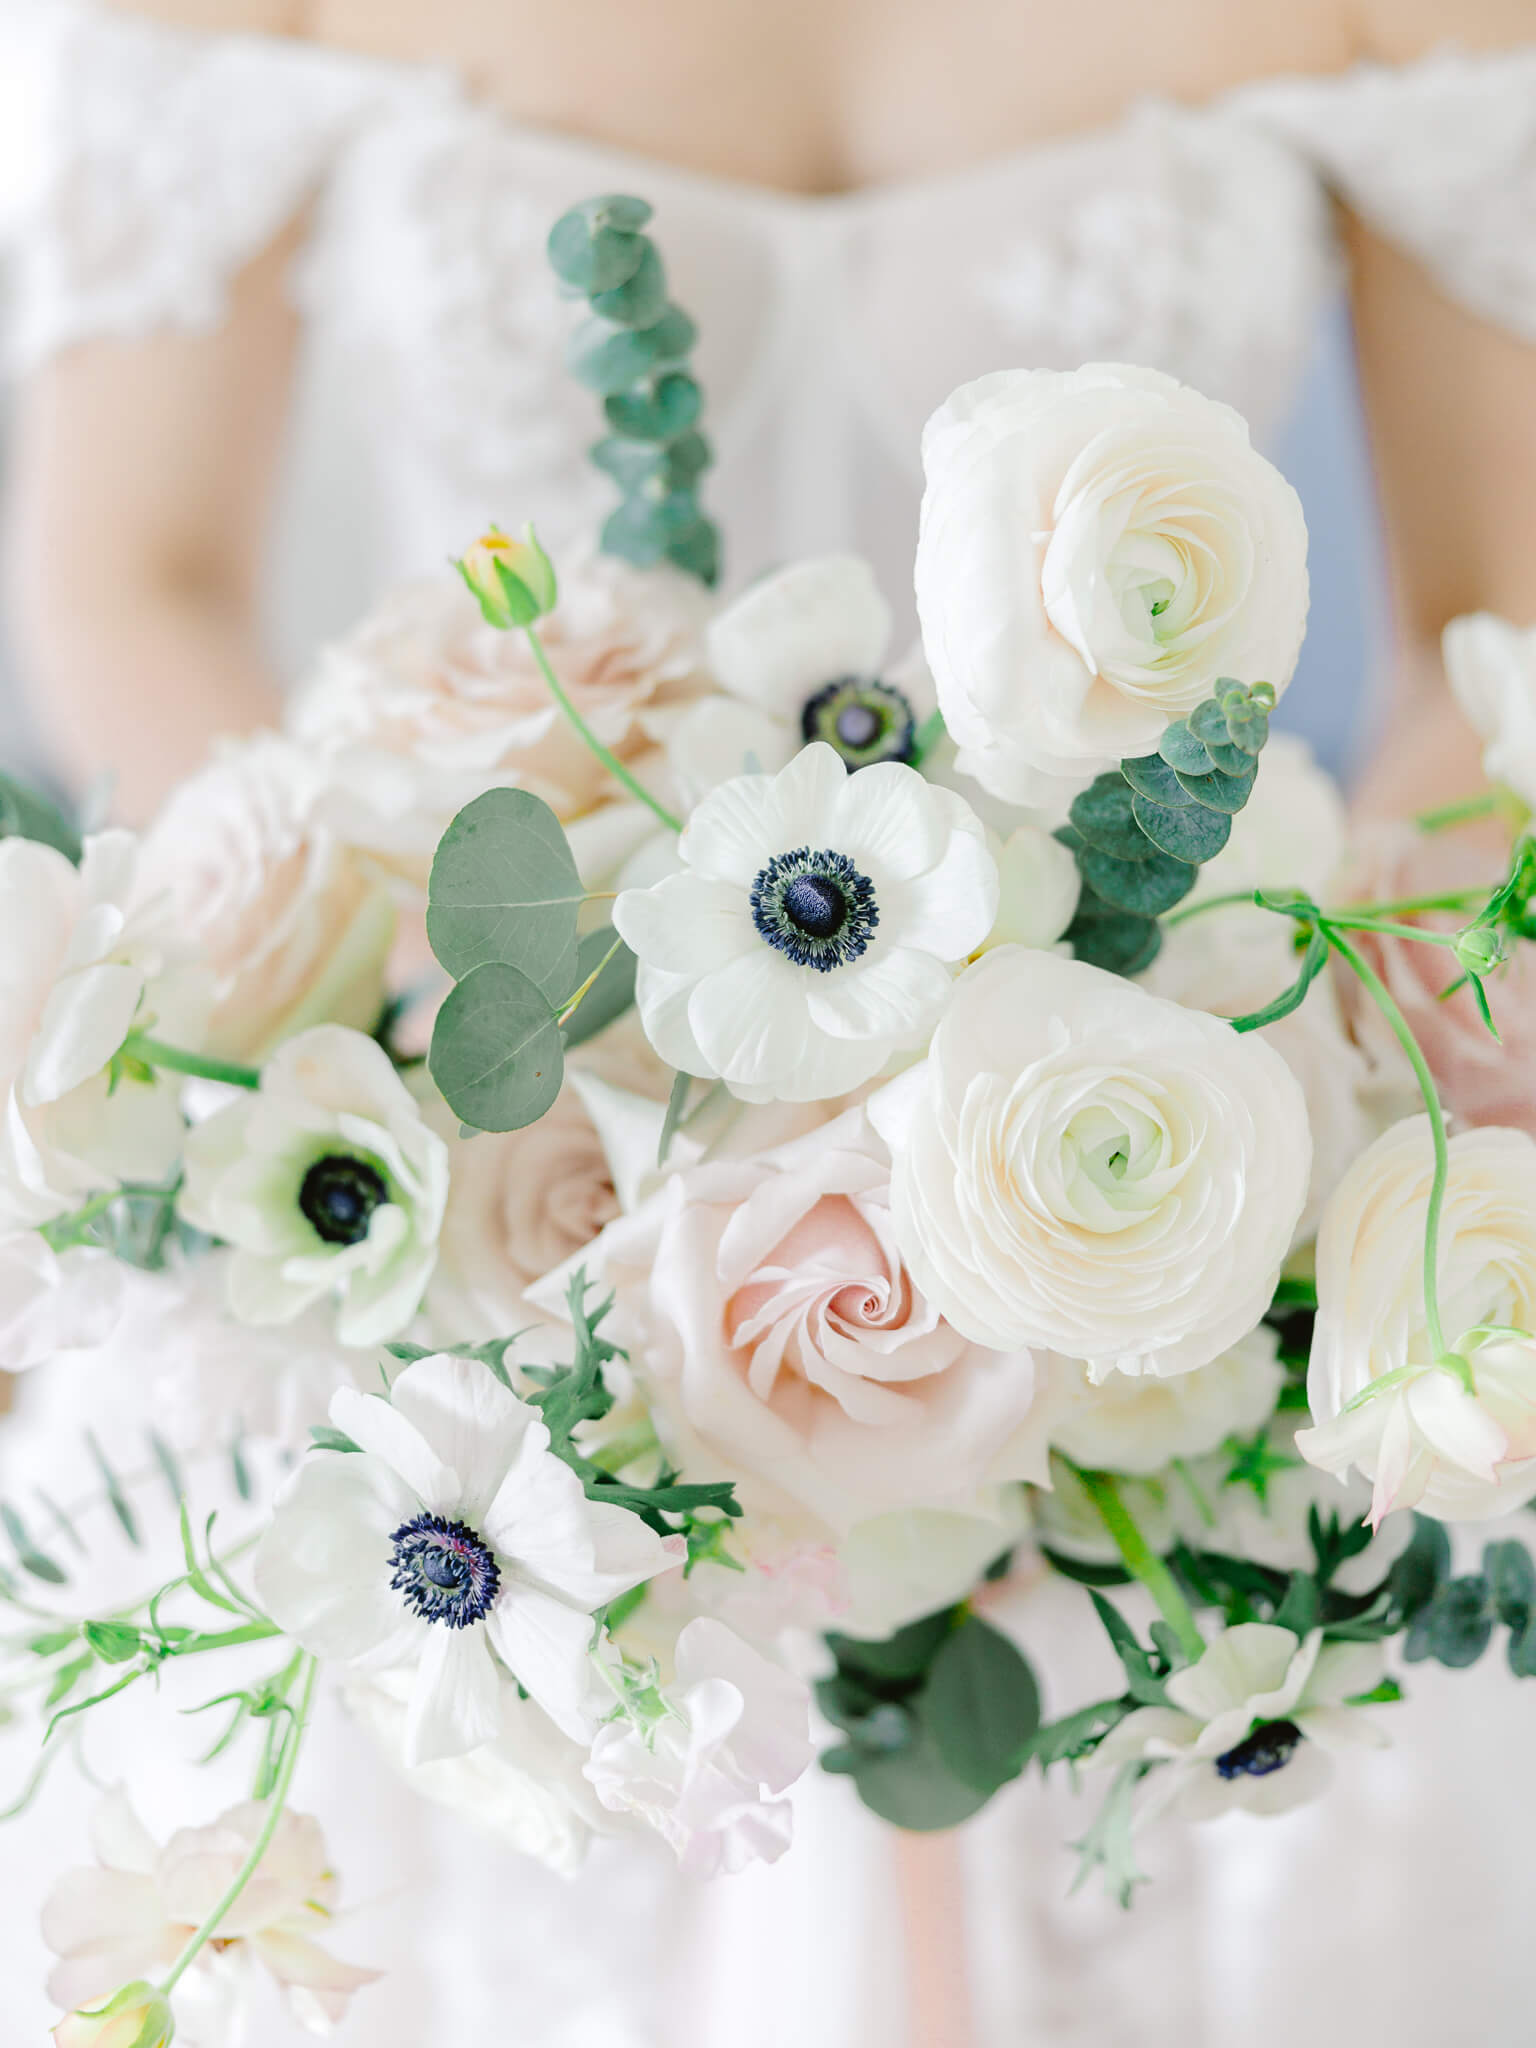 A close up of a bride in her wedding dress holding her bouquet of anemones, roses, eucalyptus and ranunculus.